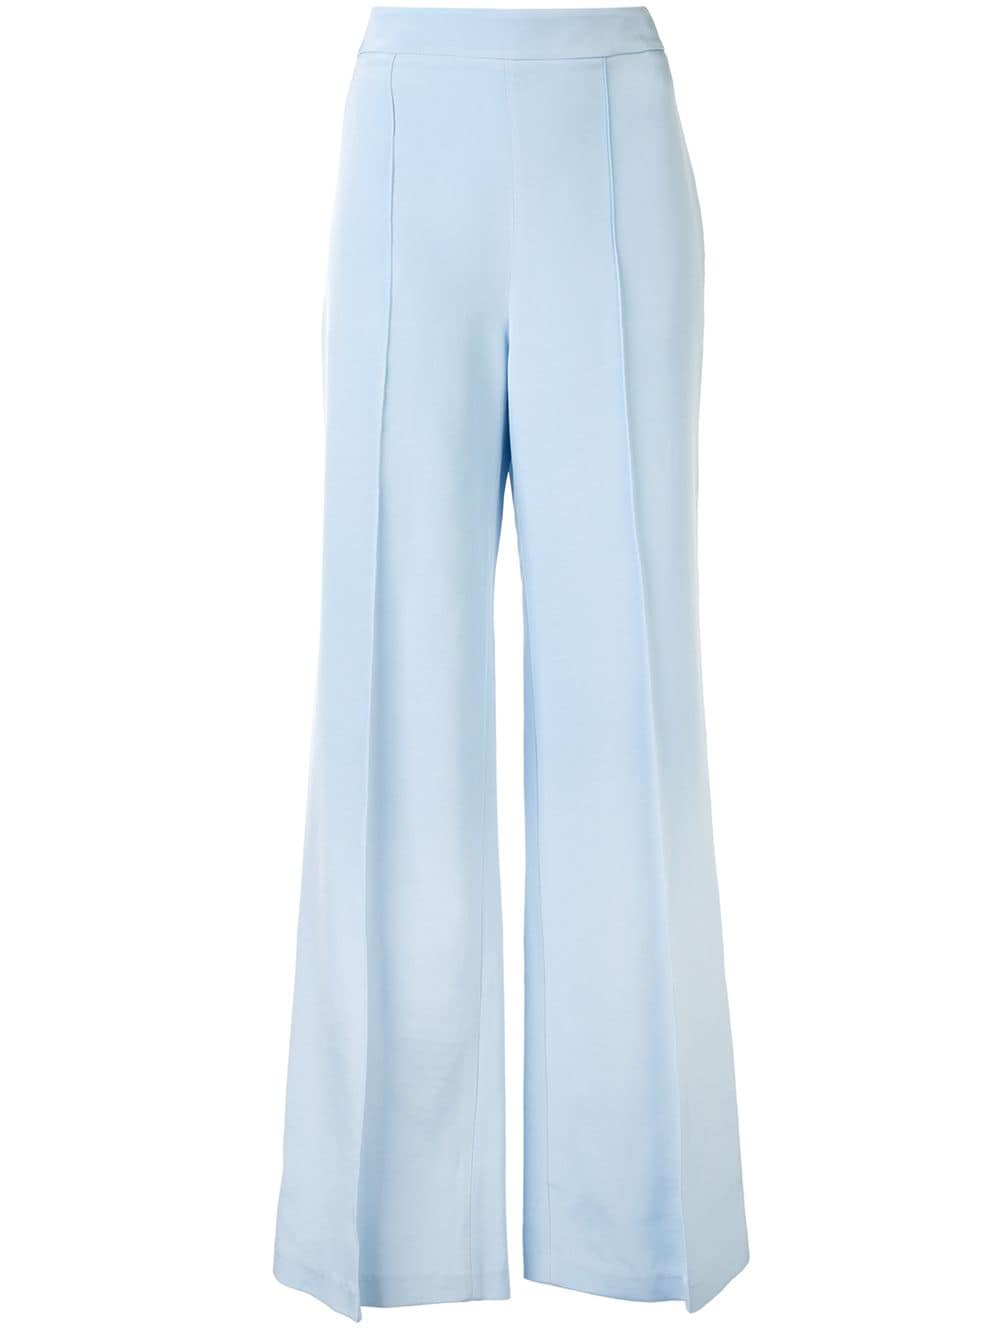 Macgraw Peacock flared trousers - Blue von Macgraw